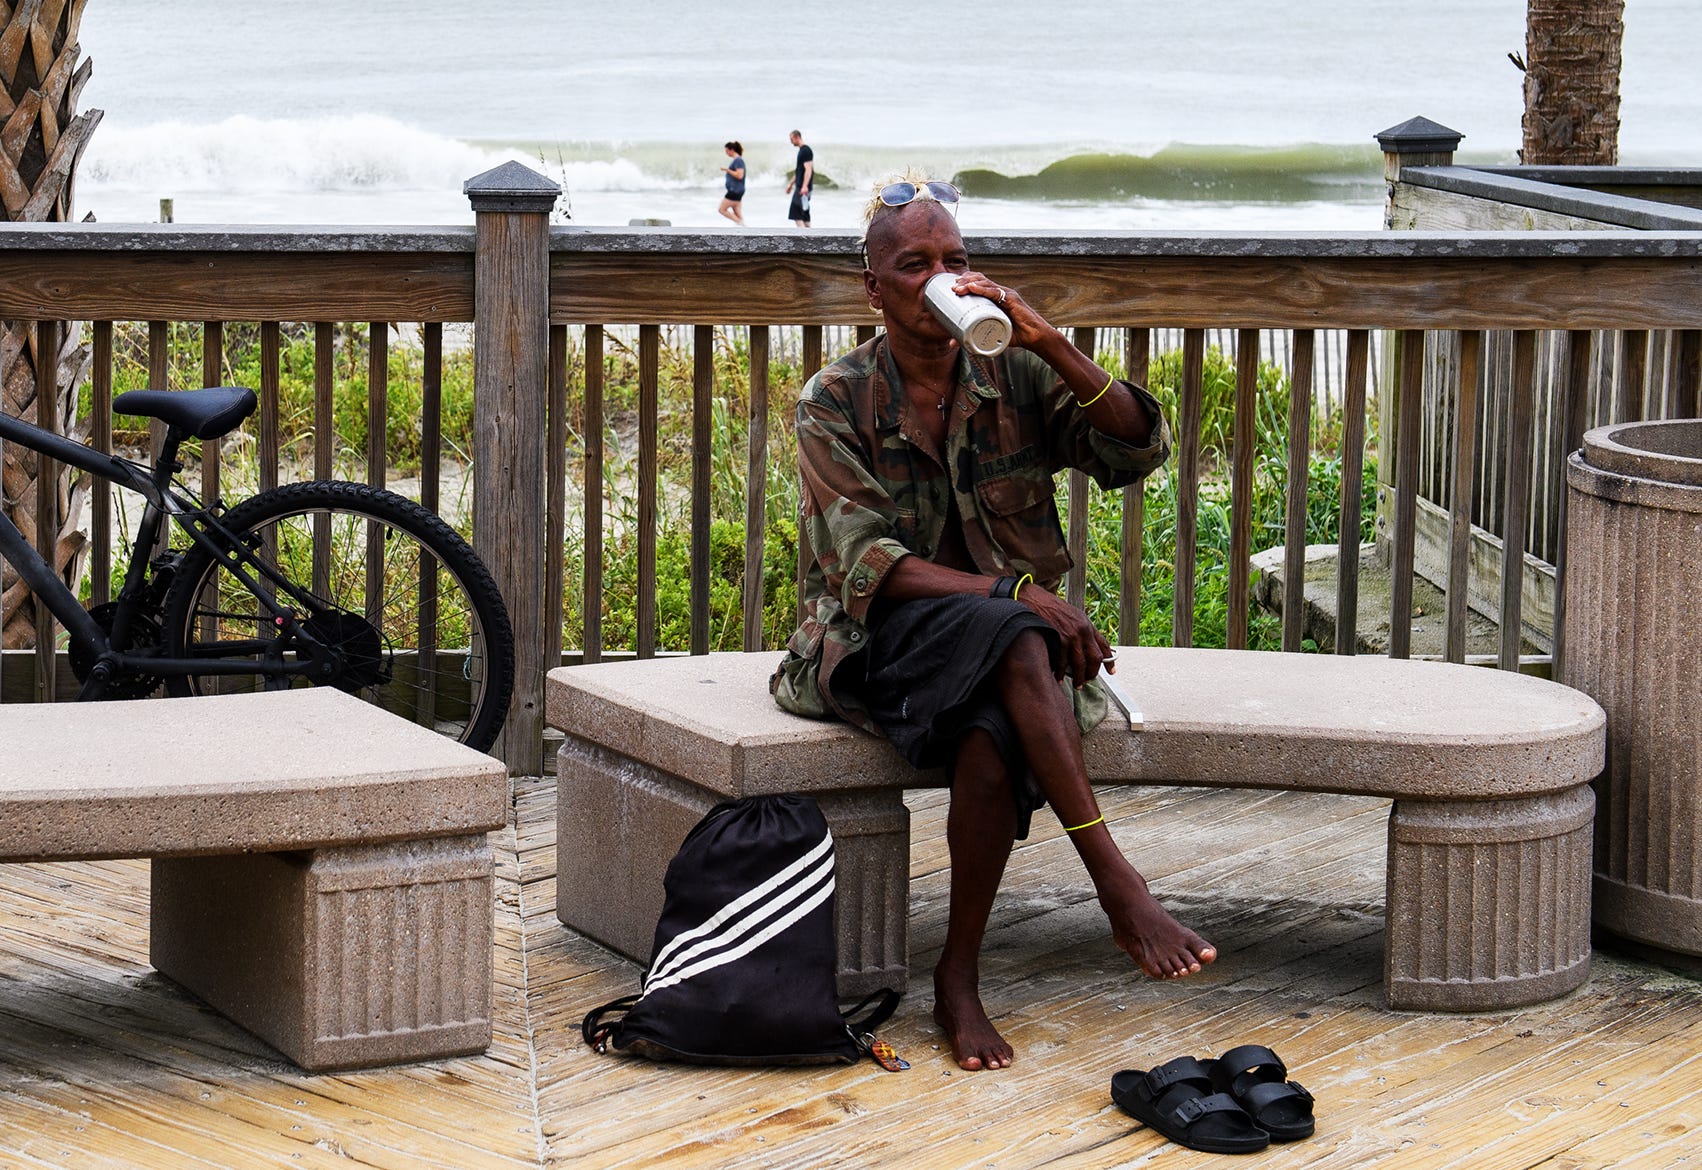 Shane "Rooster" Bacchus, a homeless man living in Myrtle Beach, S.C., takes a drink from his water bottle at the Myrtle Beach Boardwalk and Promenade on Sept. 13, 2018. Bacchus said he will be sleeping in a truck during Hurricane Florence.